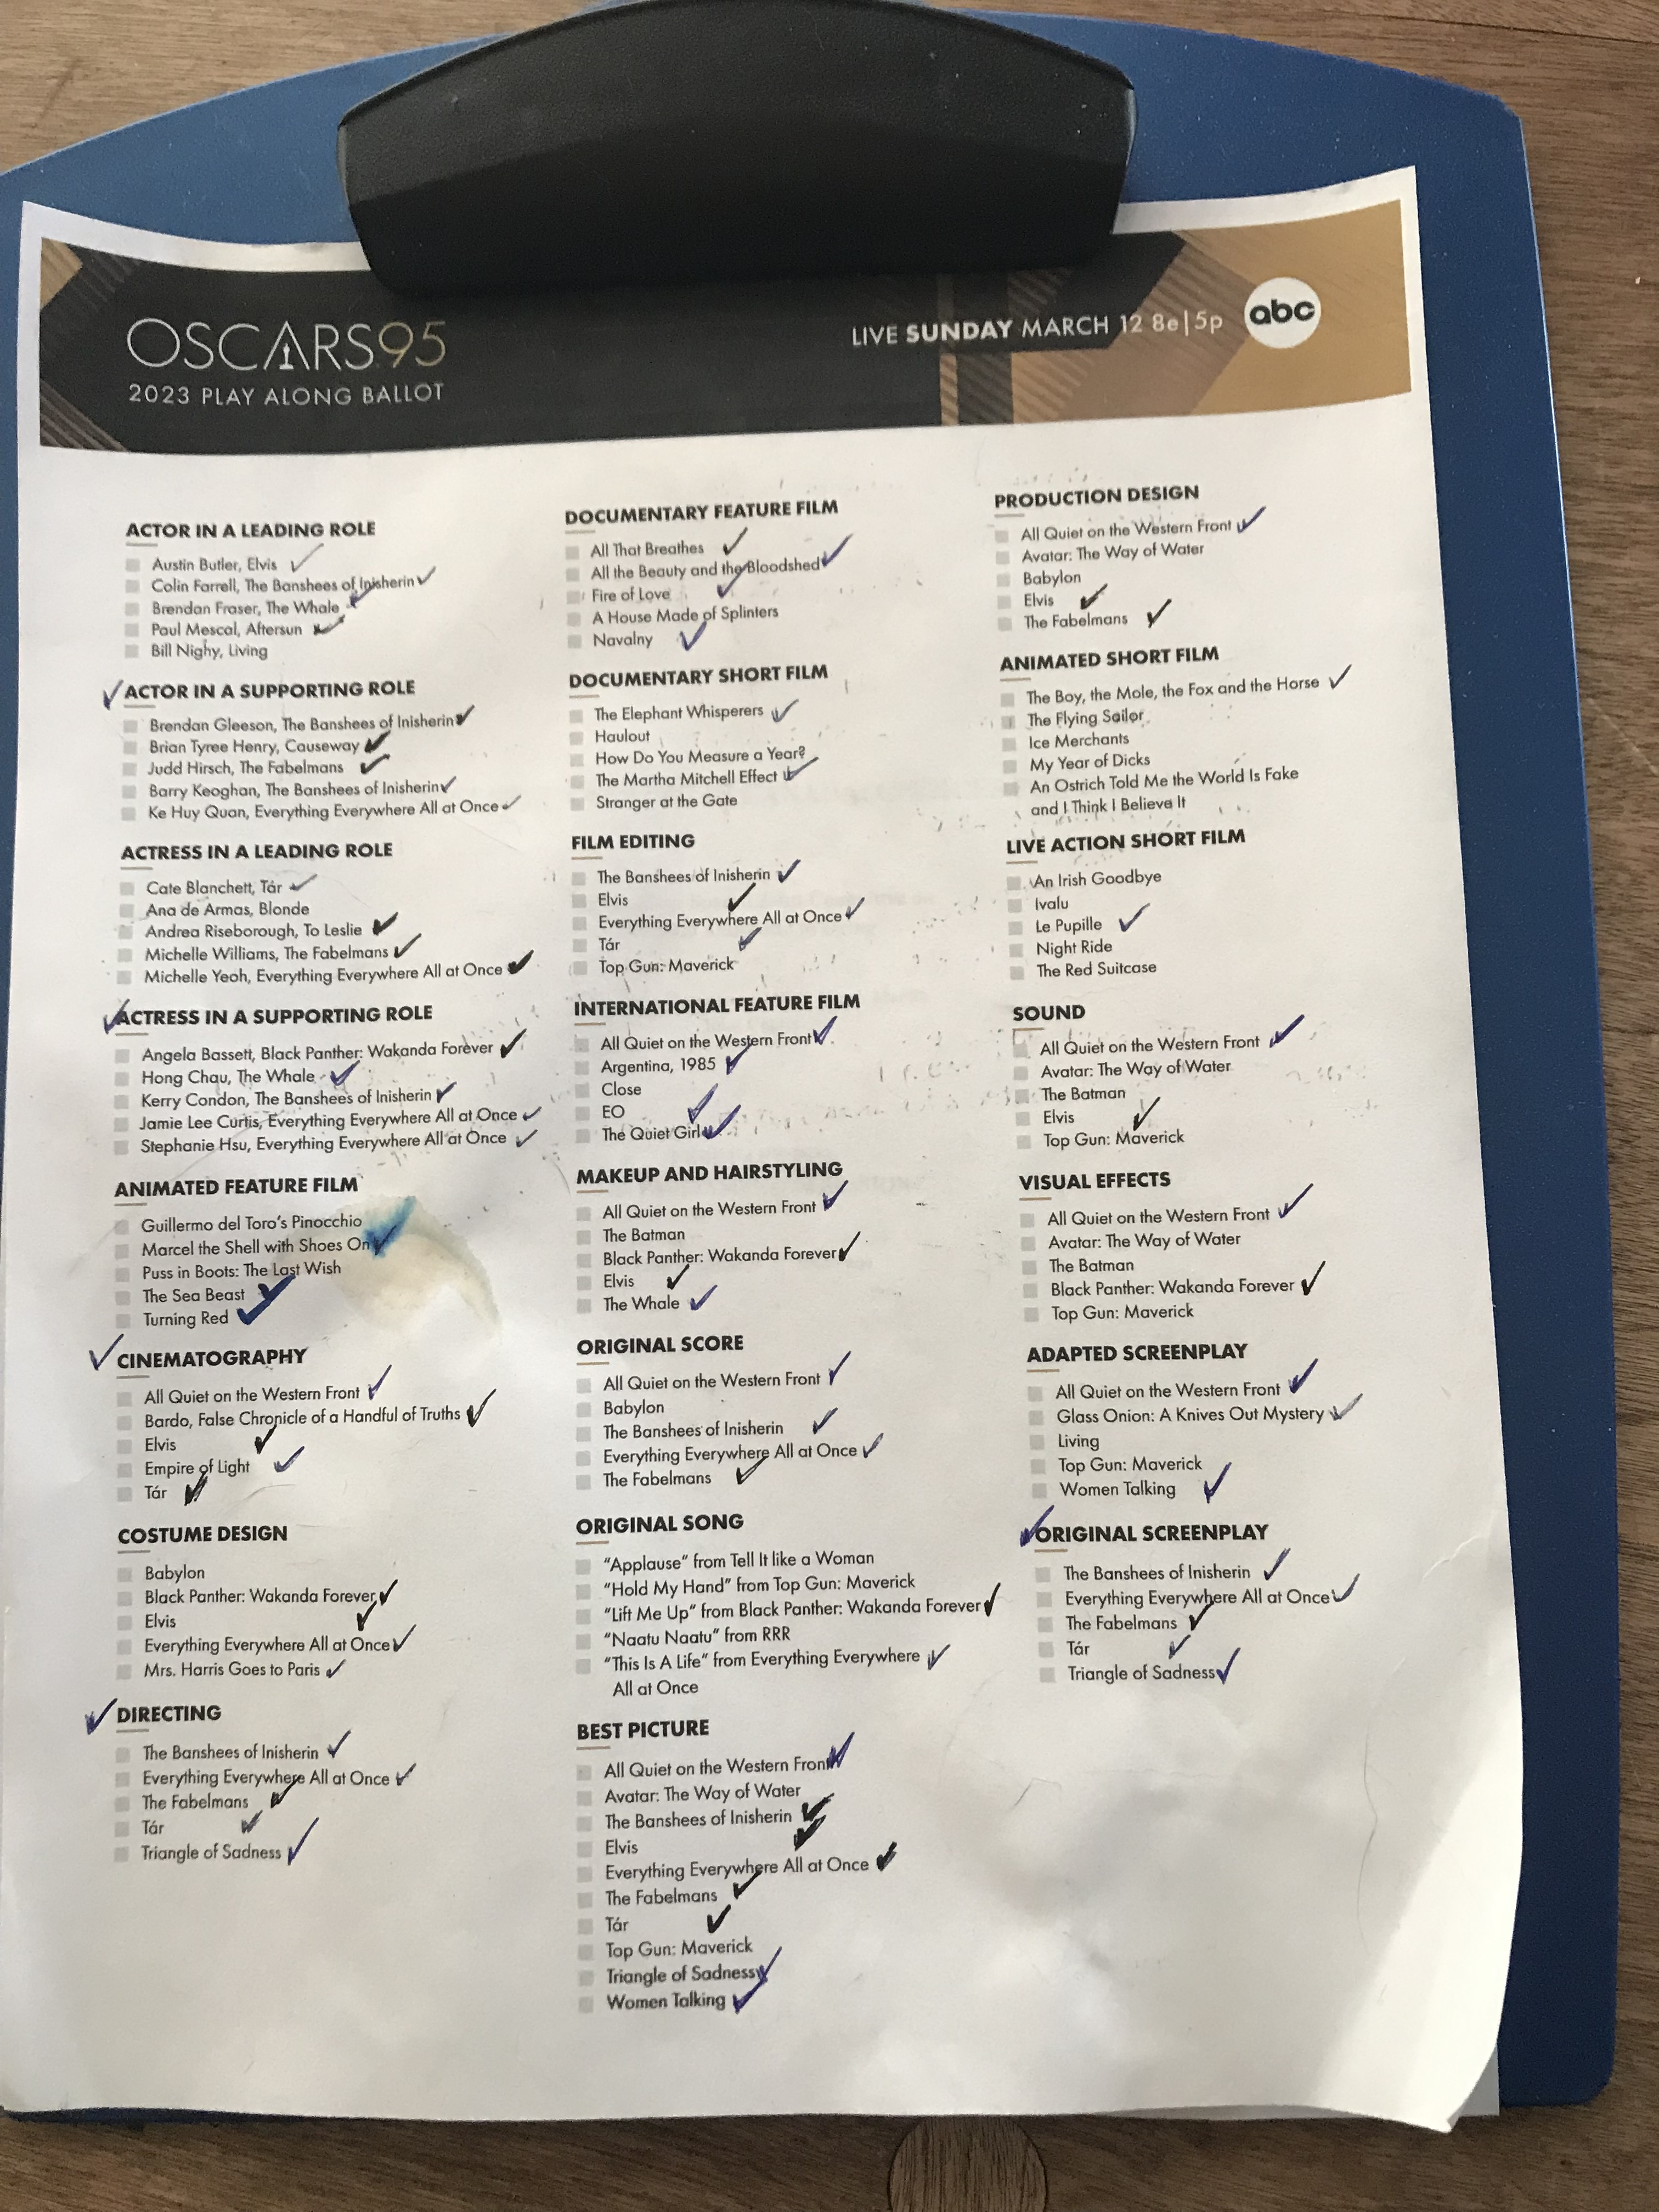 A dog-eared, coffee-stained list of categories and nominees, with lots of check marks on a blue clipboard.